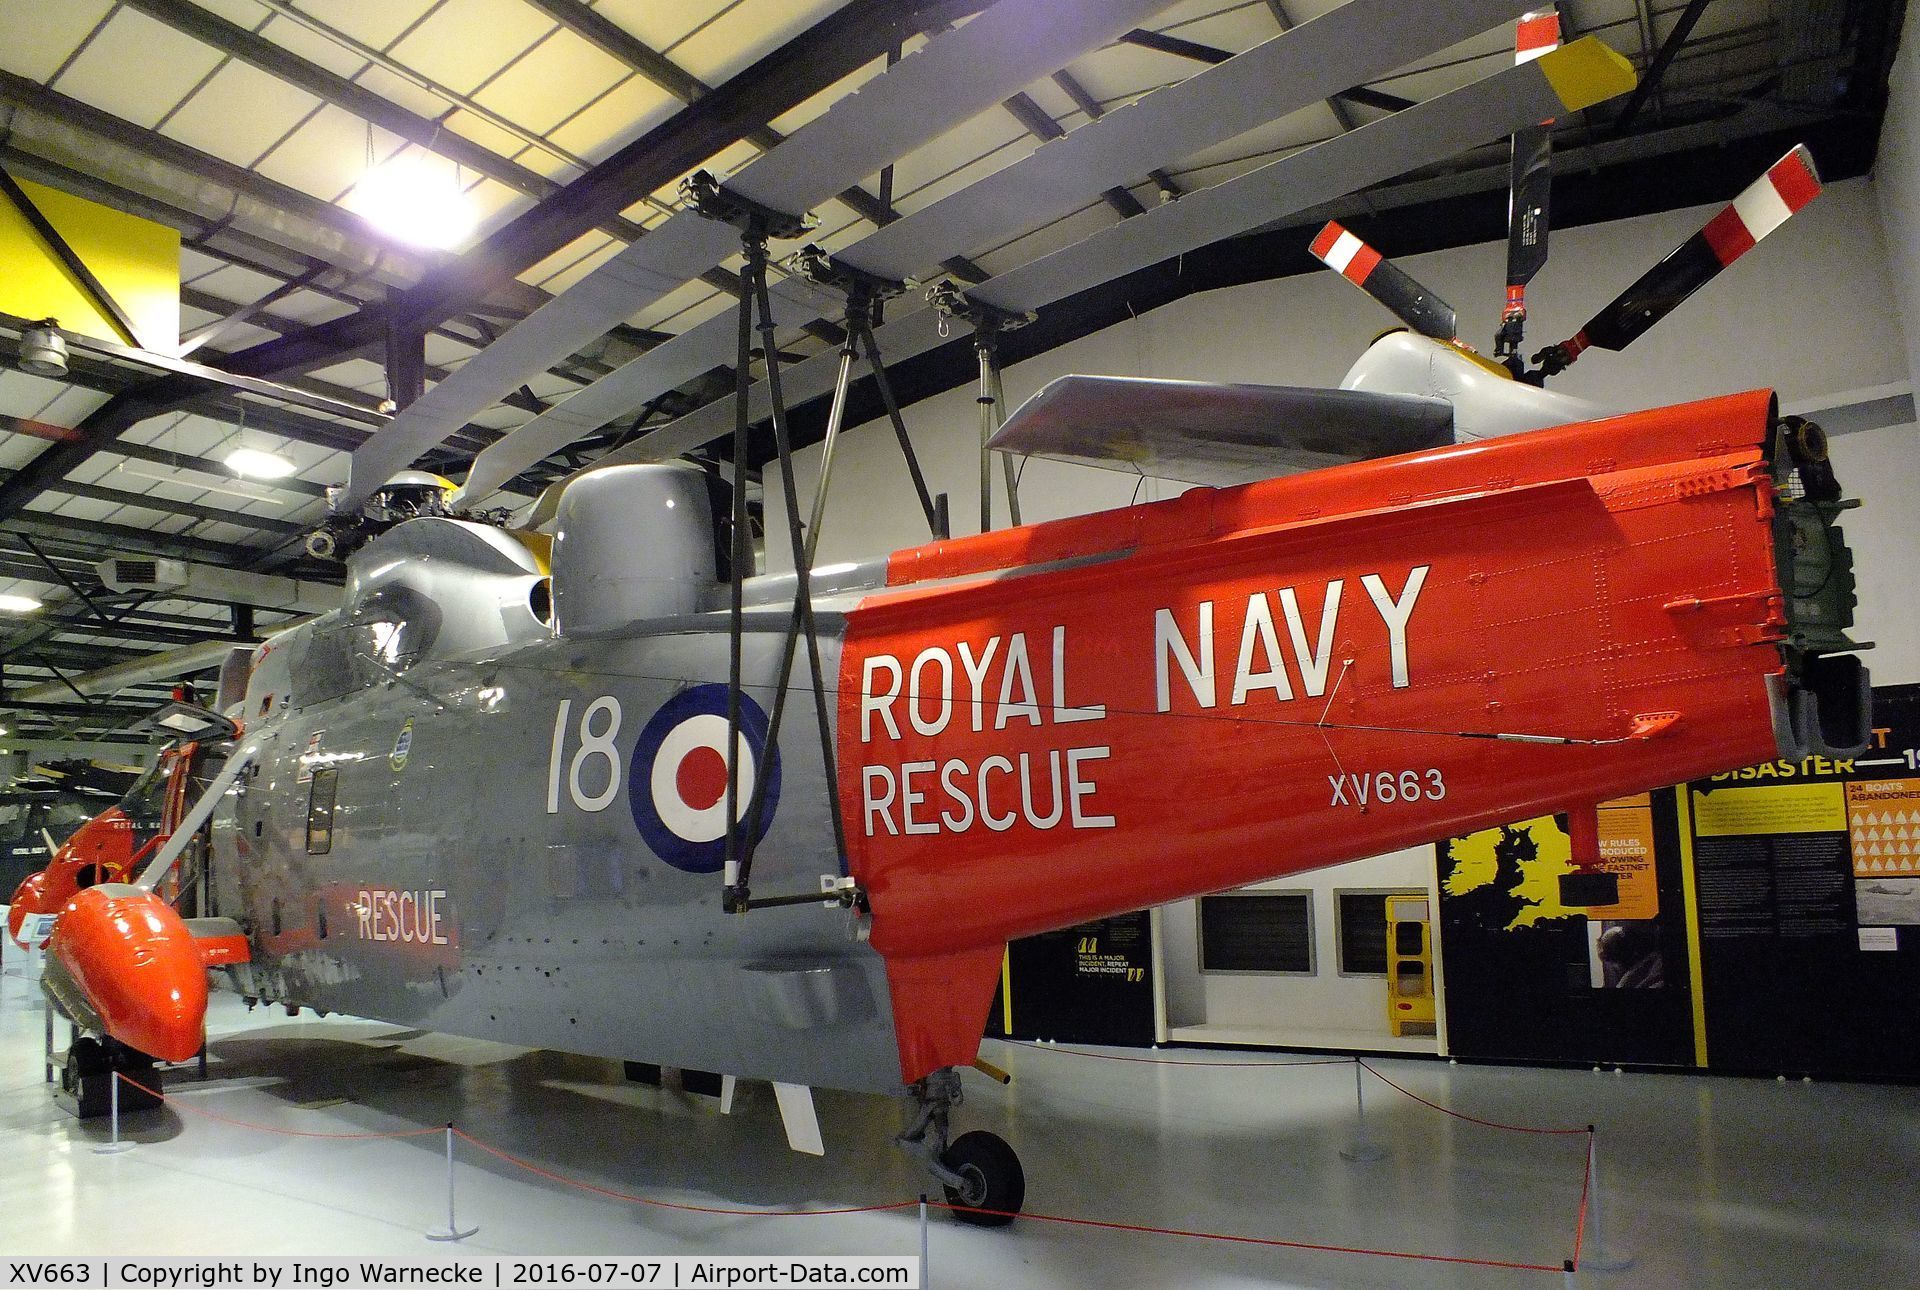 XV663, 1970 Westland Sea King HAS.6 C/N WA651, Westland Sea King HAS6 (special split SAR-colours, port side Royal Navy, starboard side RAF, for exhibition purposes) at the FAA Museum, Yeovilton